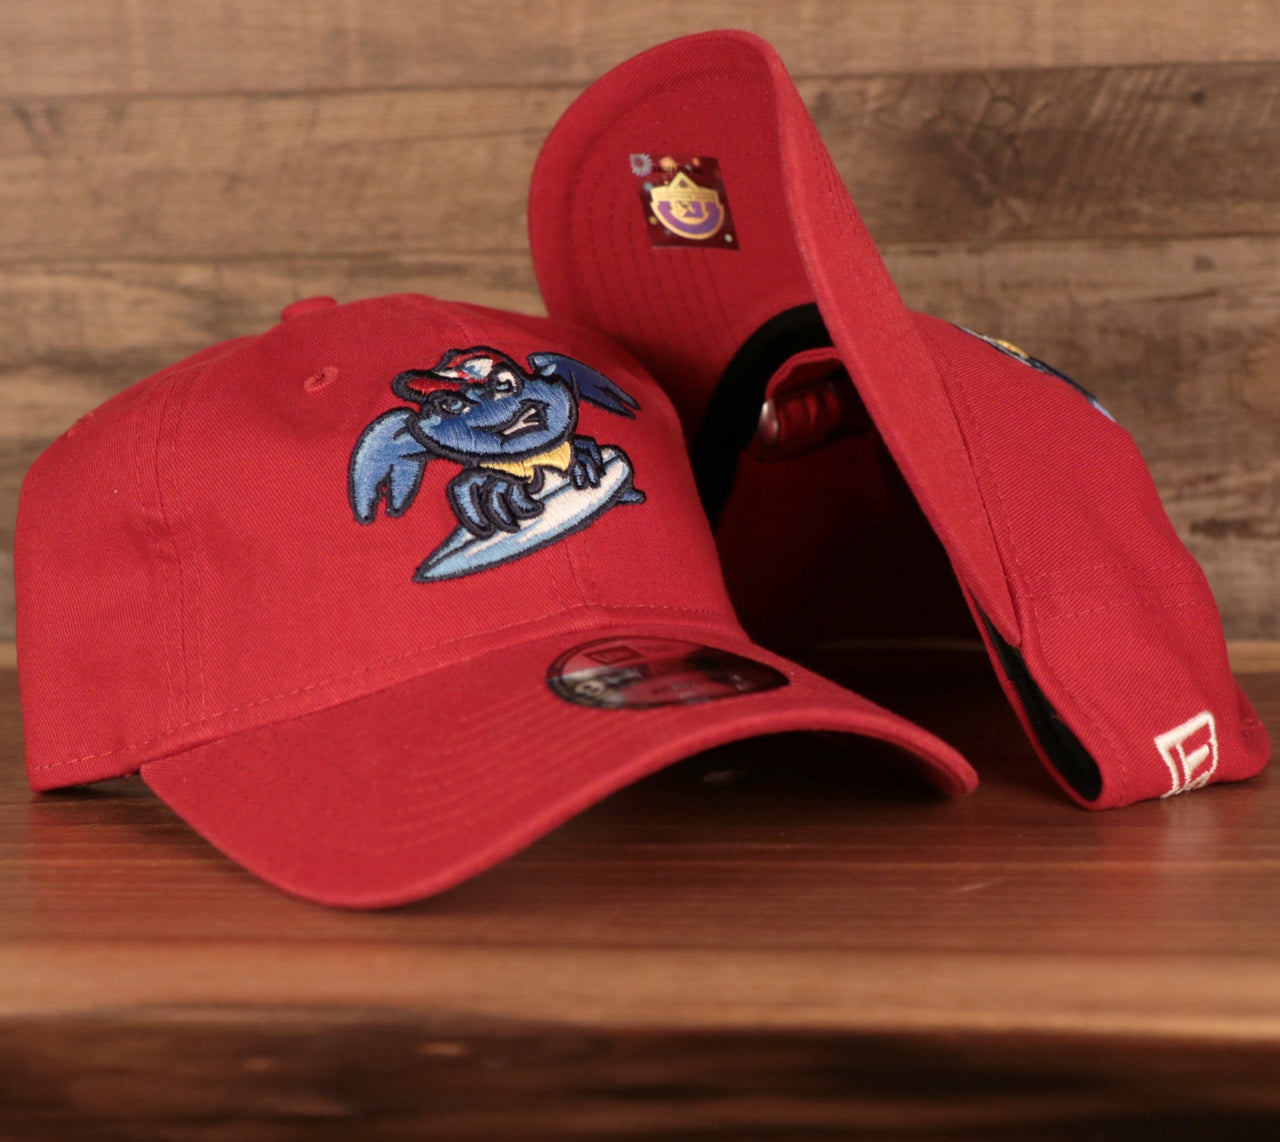 The Jersey Shoe BlueClaws baseball cap is solid red featuring an unstructured crown and a bent brim